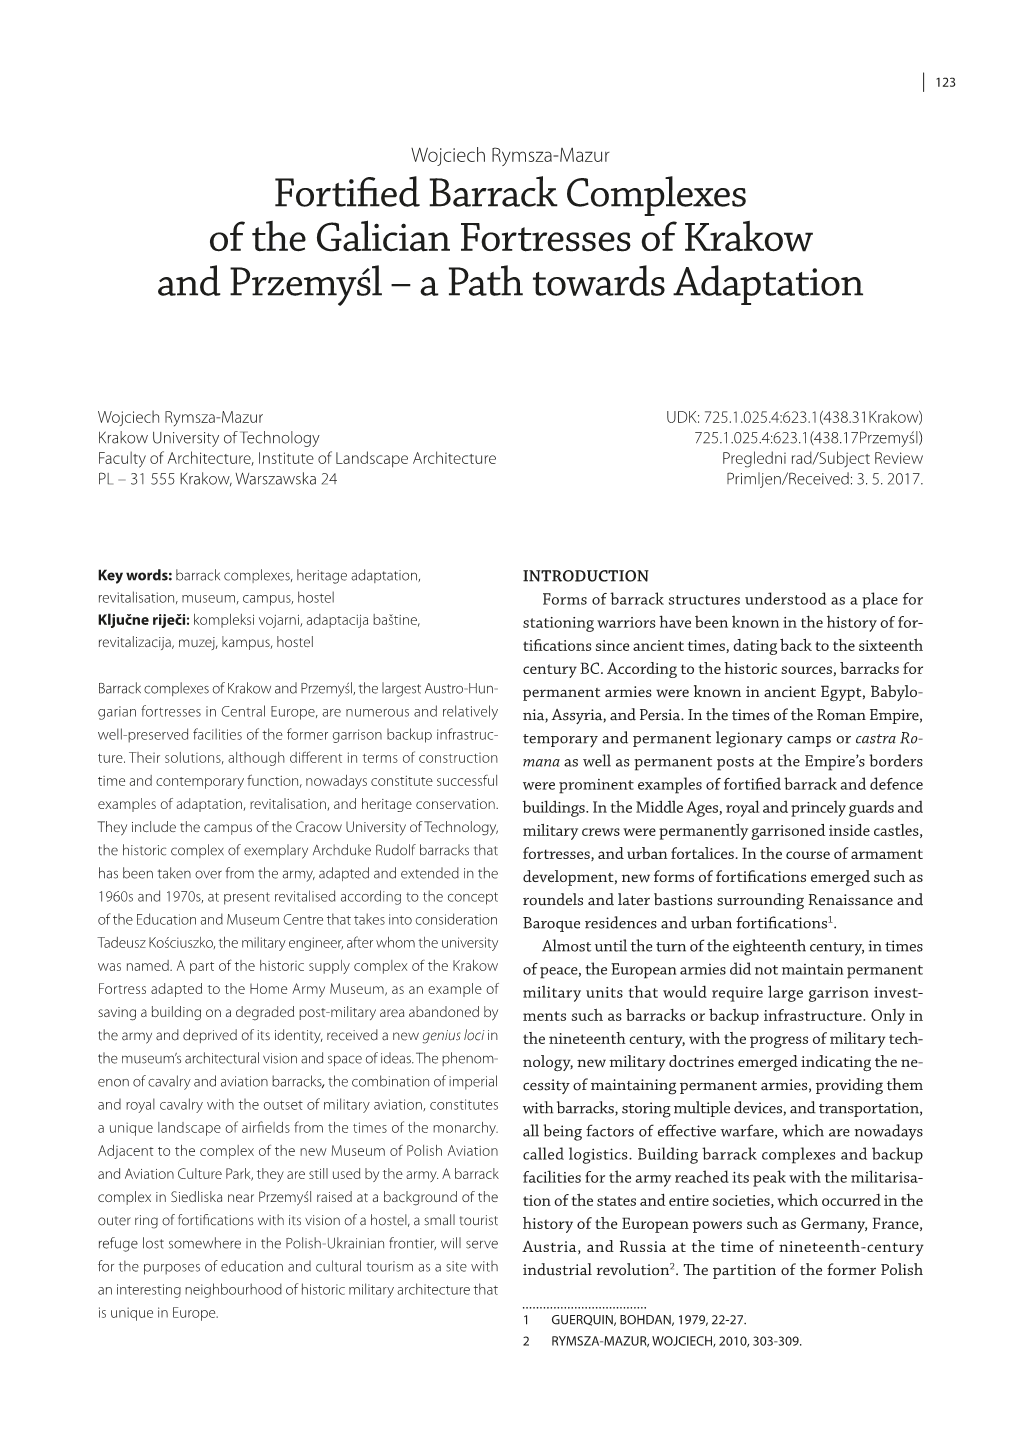 Fortified Barrack Complexes of the Galician Fortresses of Krakow and Przemyśl – a Path Towards Adaptation